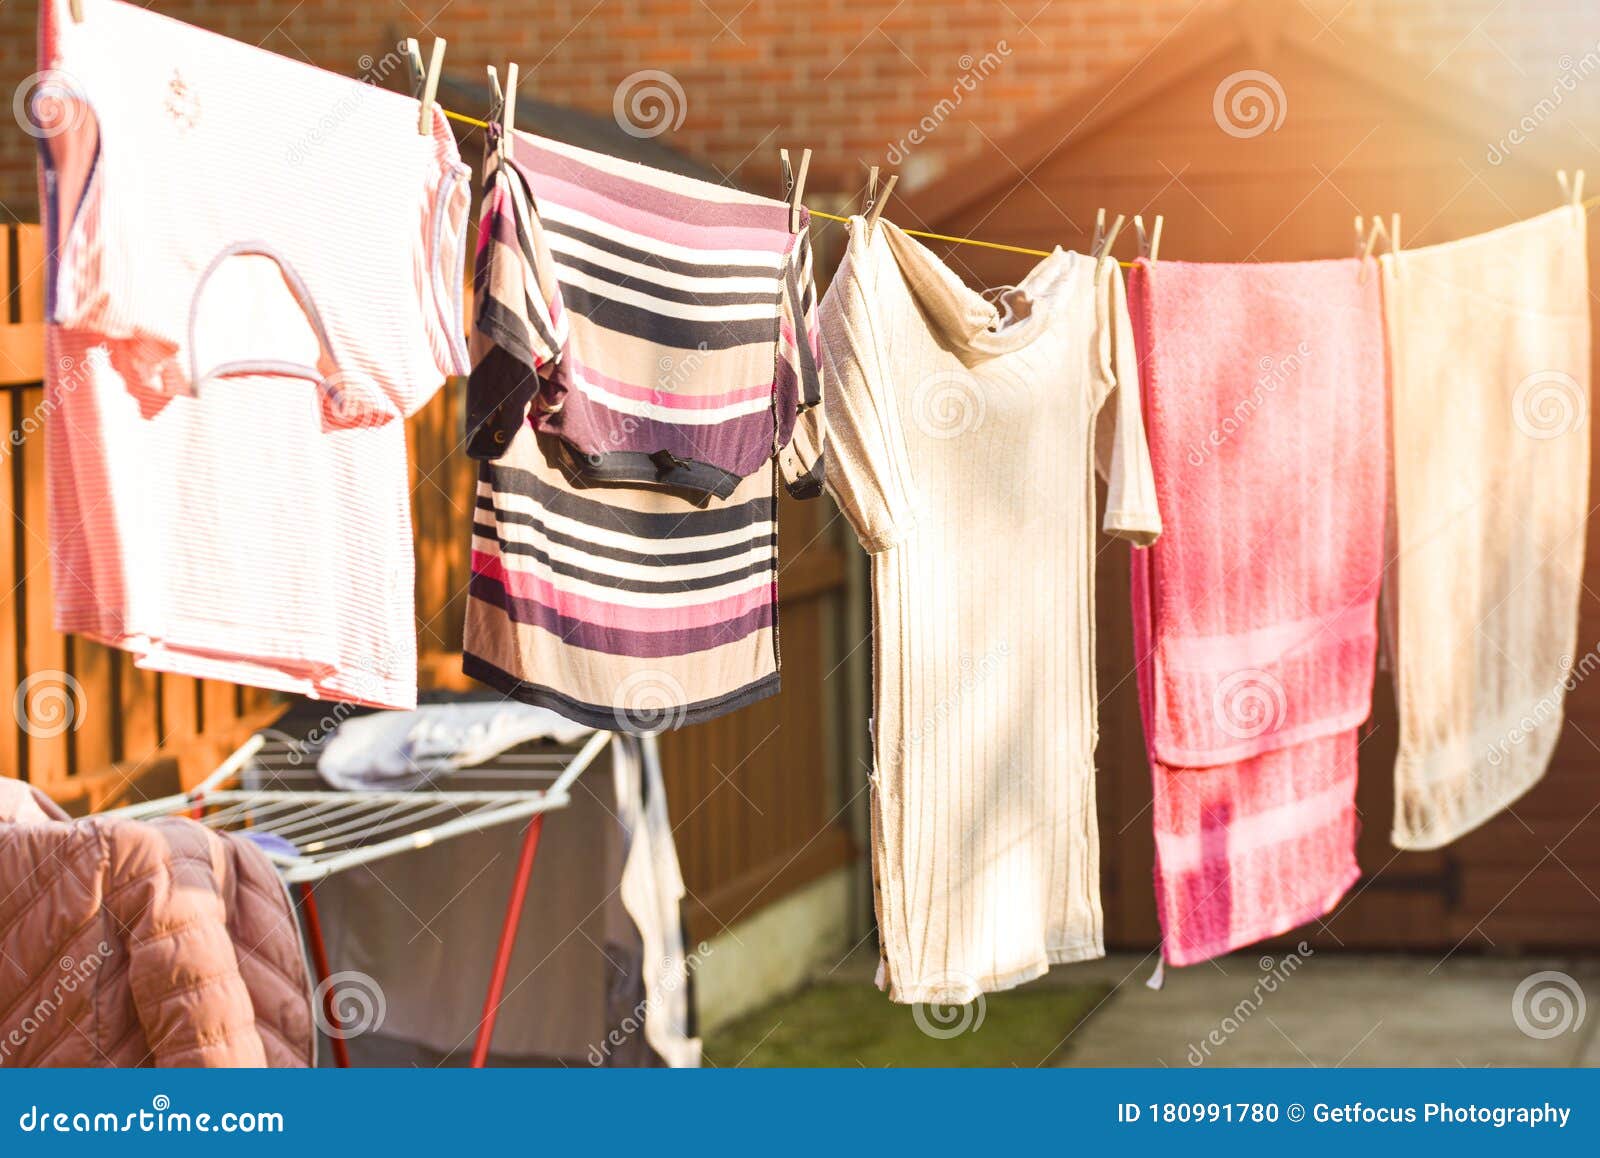 Washing Line with Drying Clothes in Outdoor Stock Photo - Image of